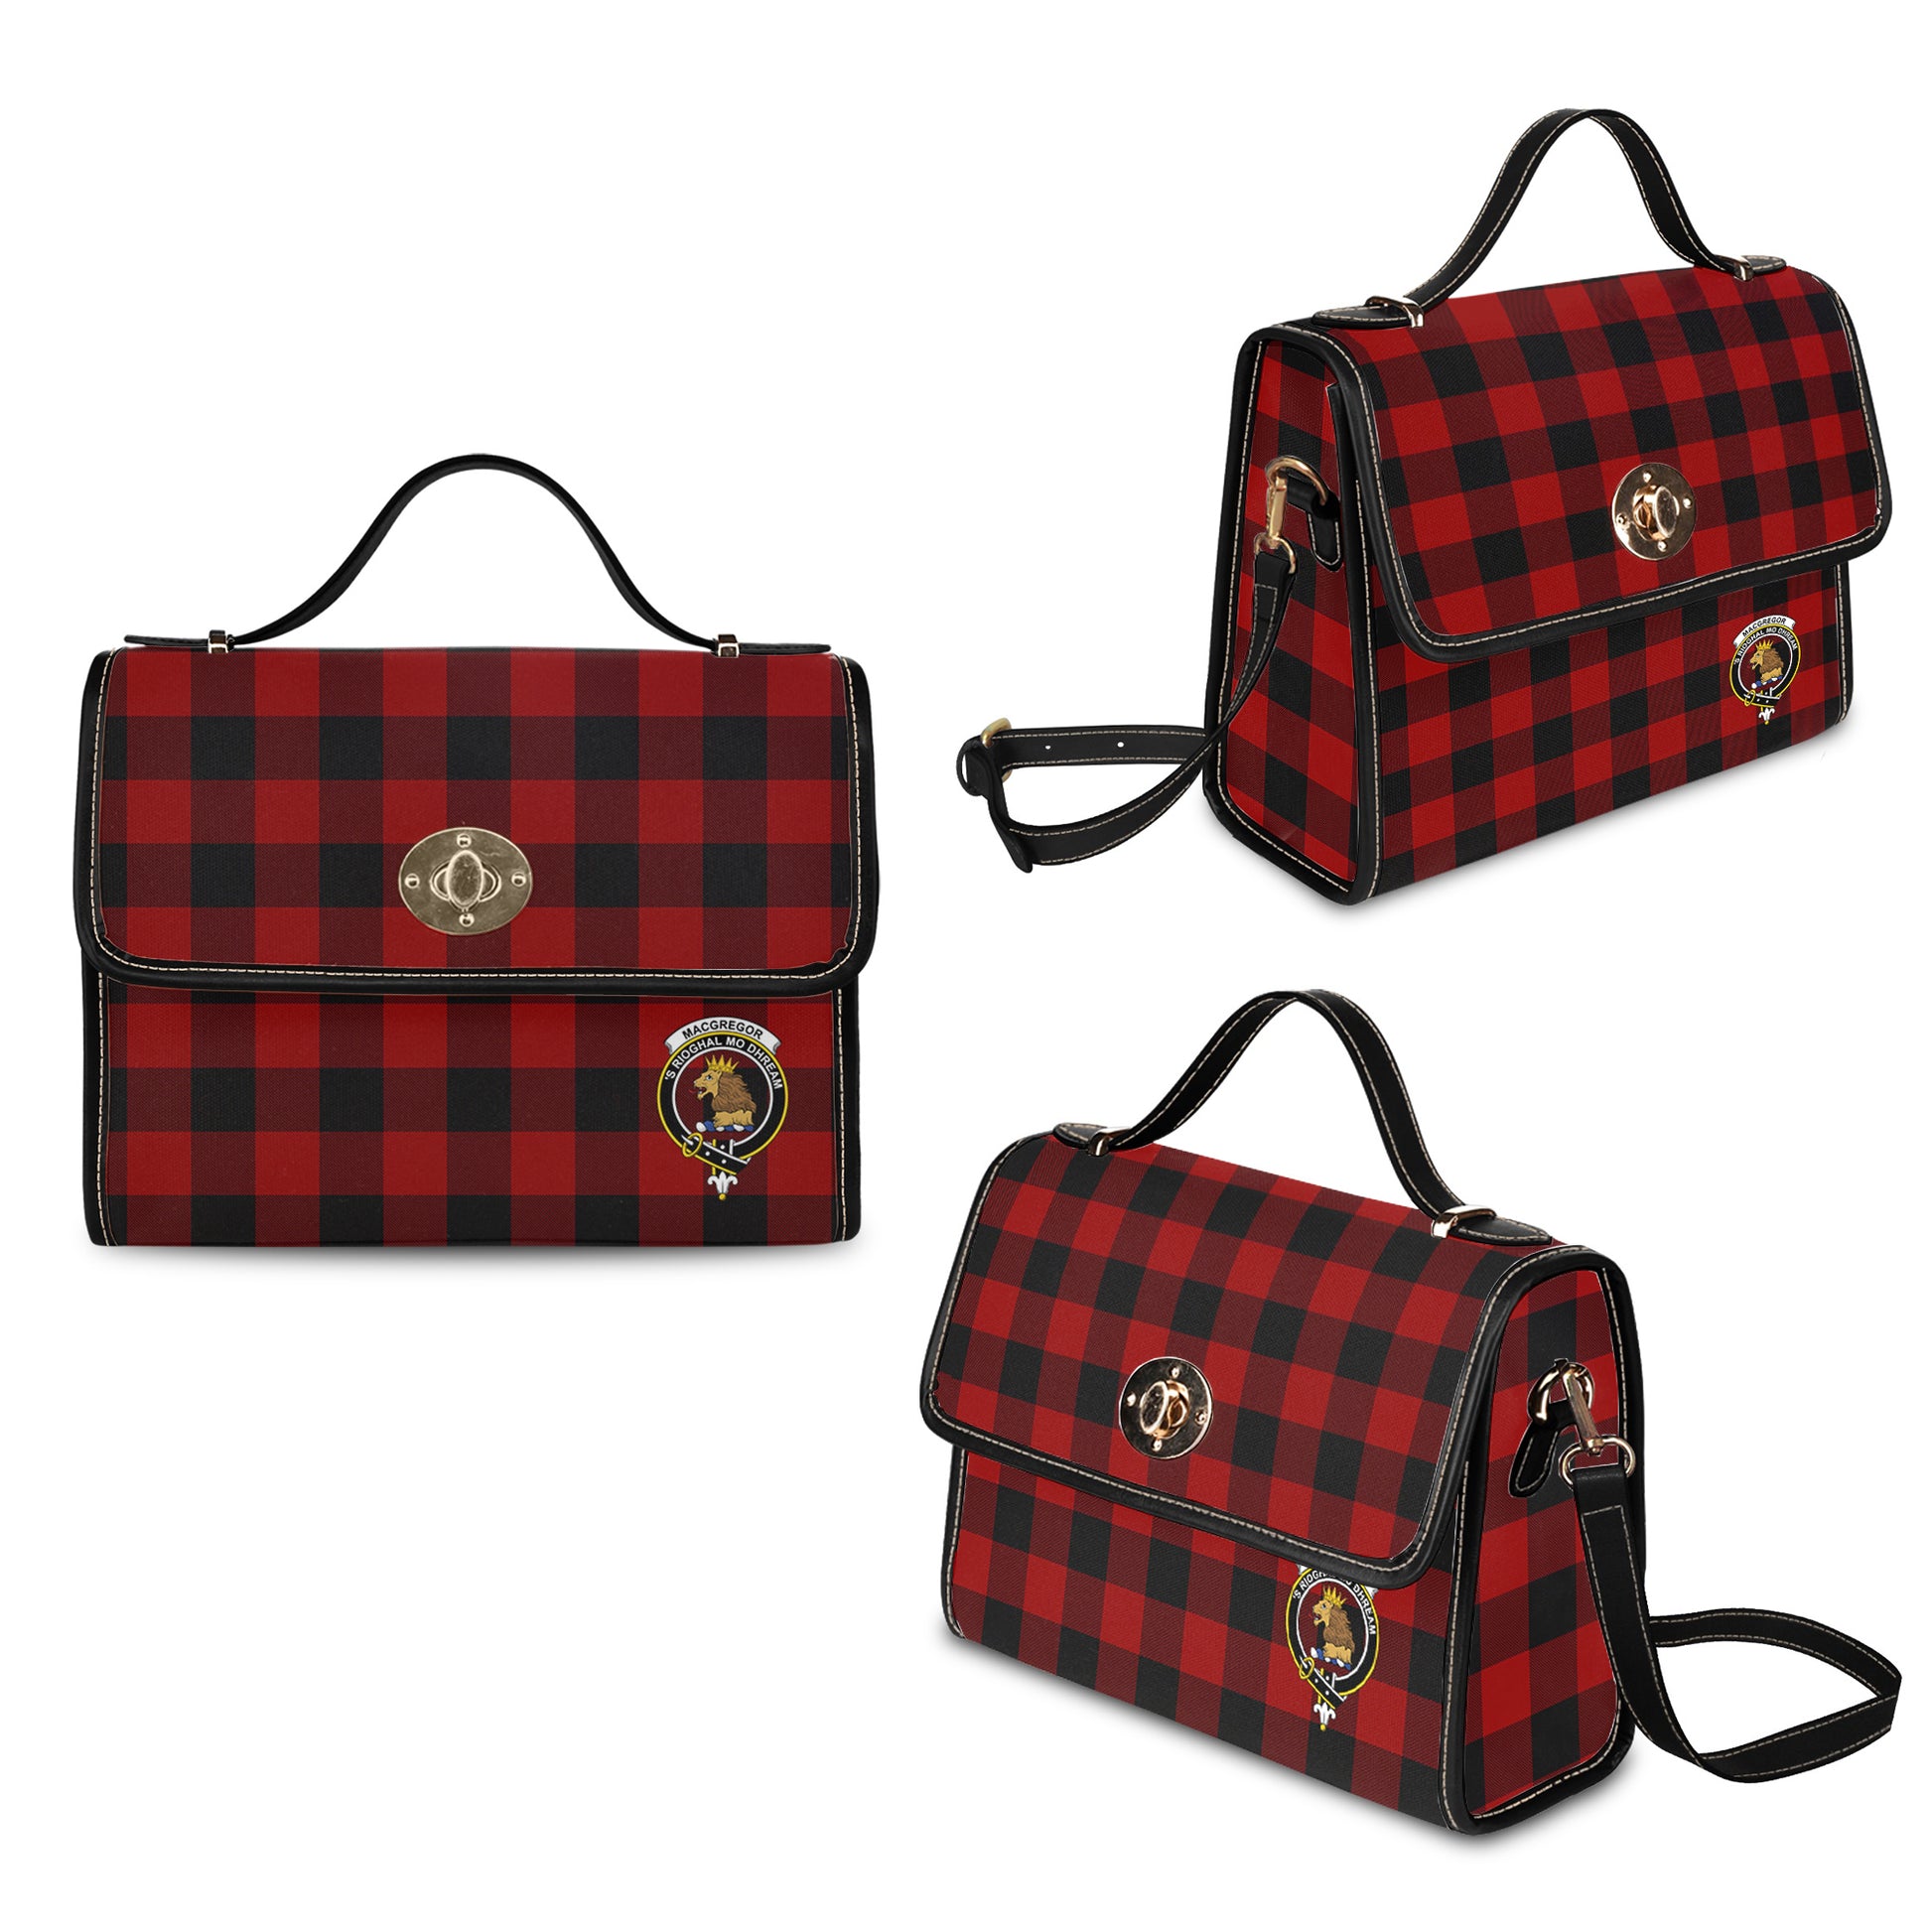 rob-roy-macgregor-tartan-leather-strap-waterproof-canvas-bag-with-family-crest